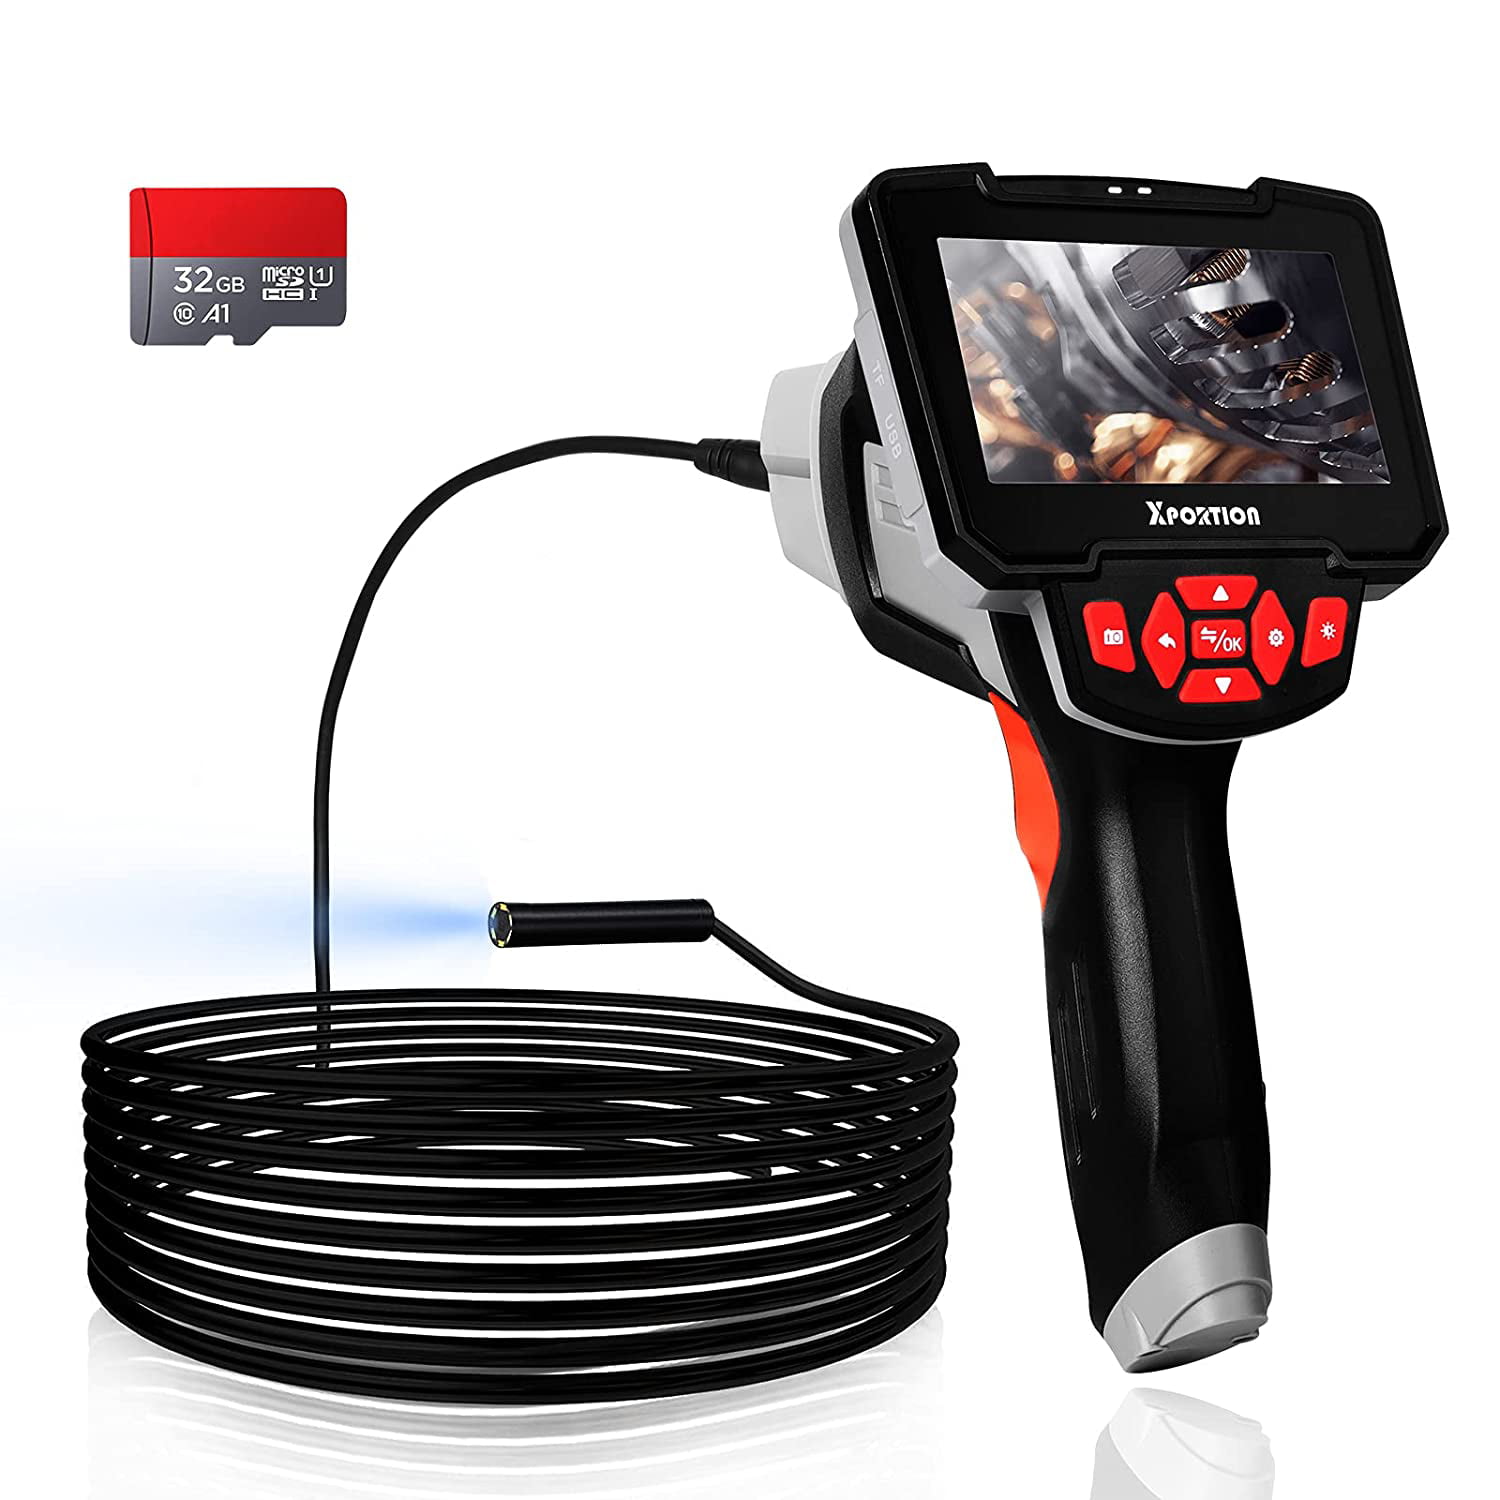 4.3 Inch 1080P LCD Screen Handheld Endoscope Digital Inspection TF Card Monitor 